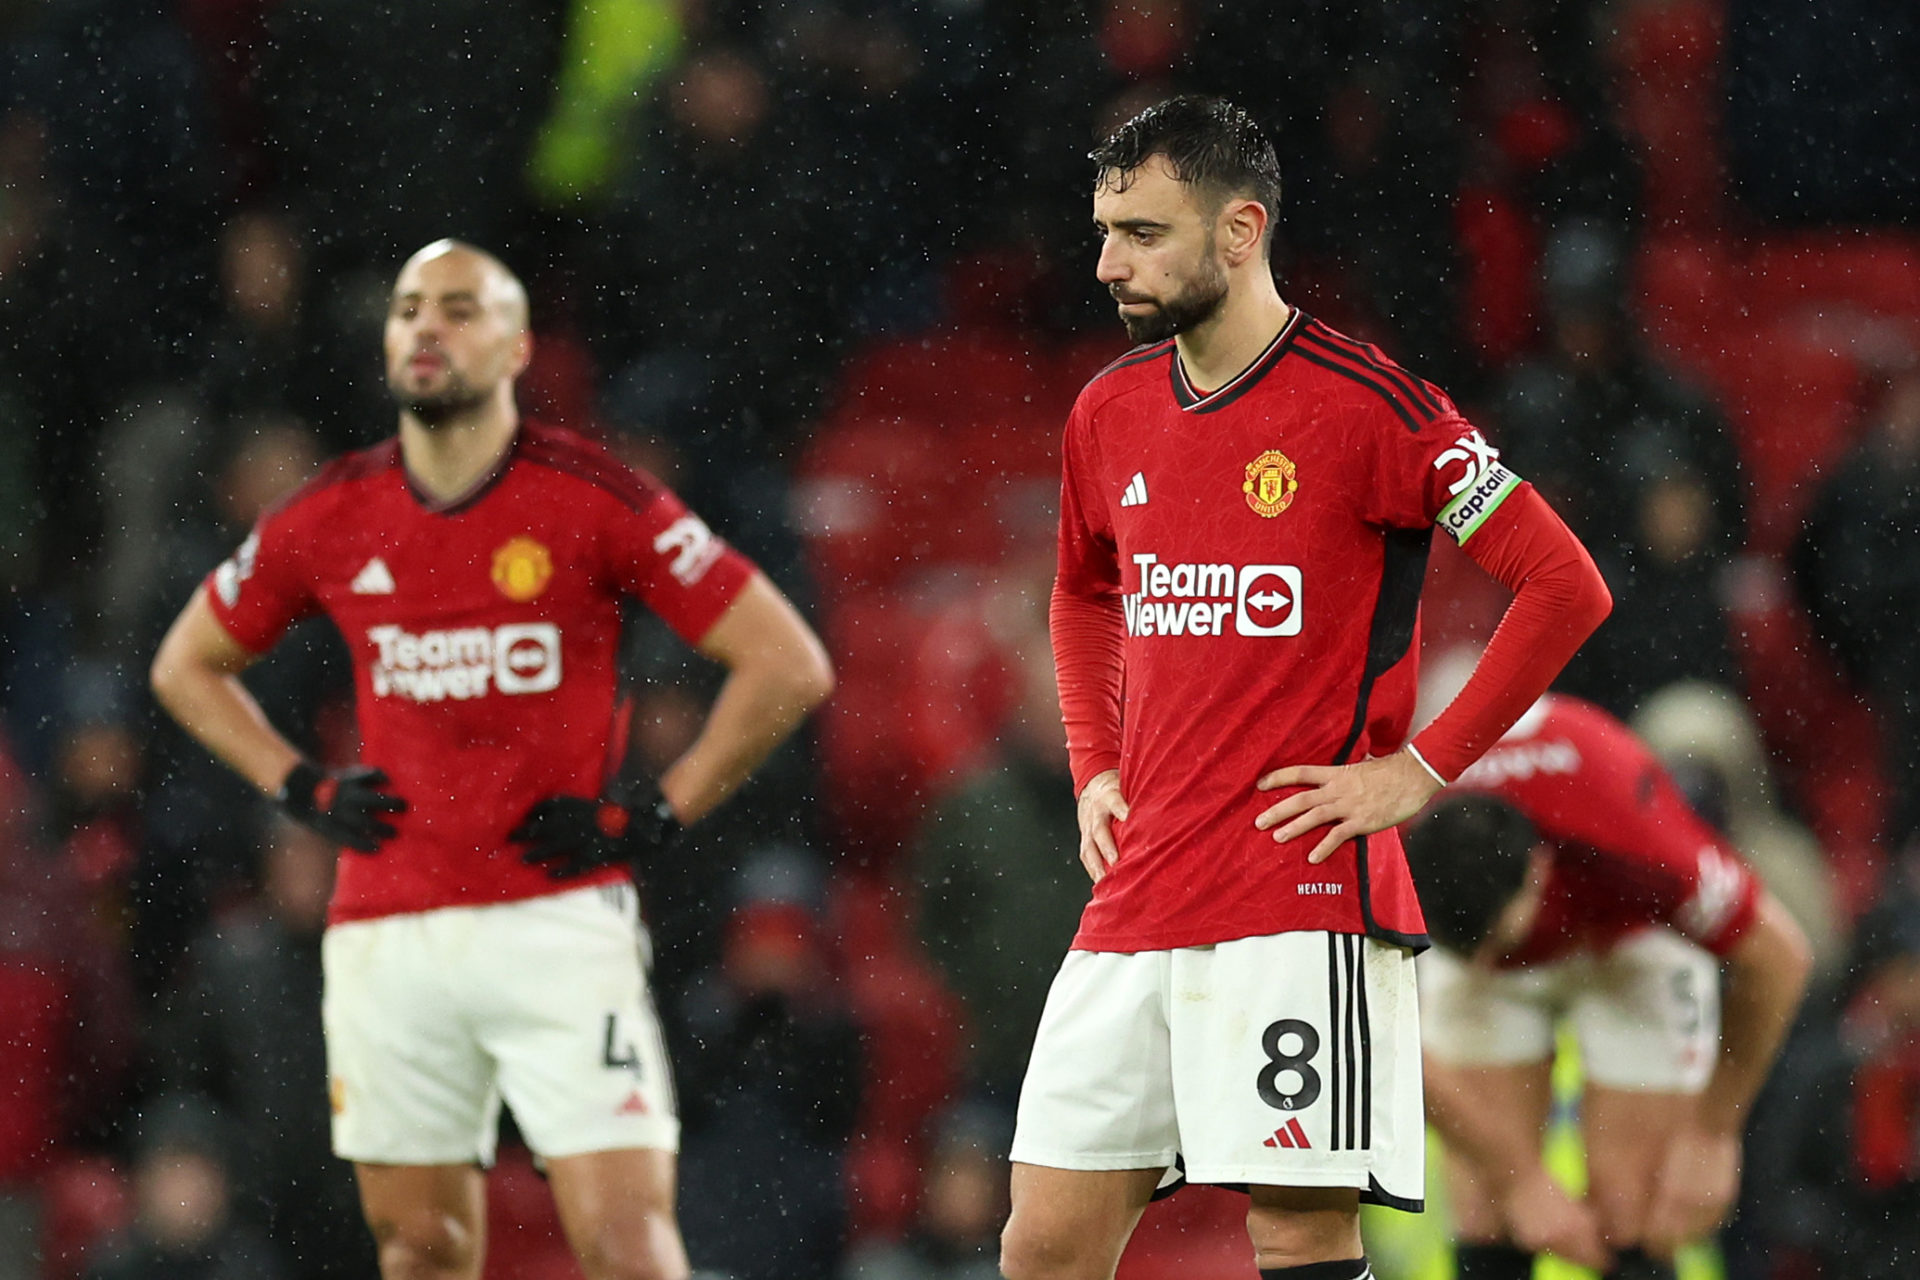 Manchester United don't need certain players in the team, warns ex-player as he hits out at attitudes